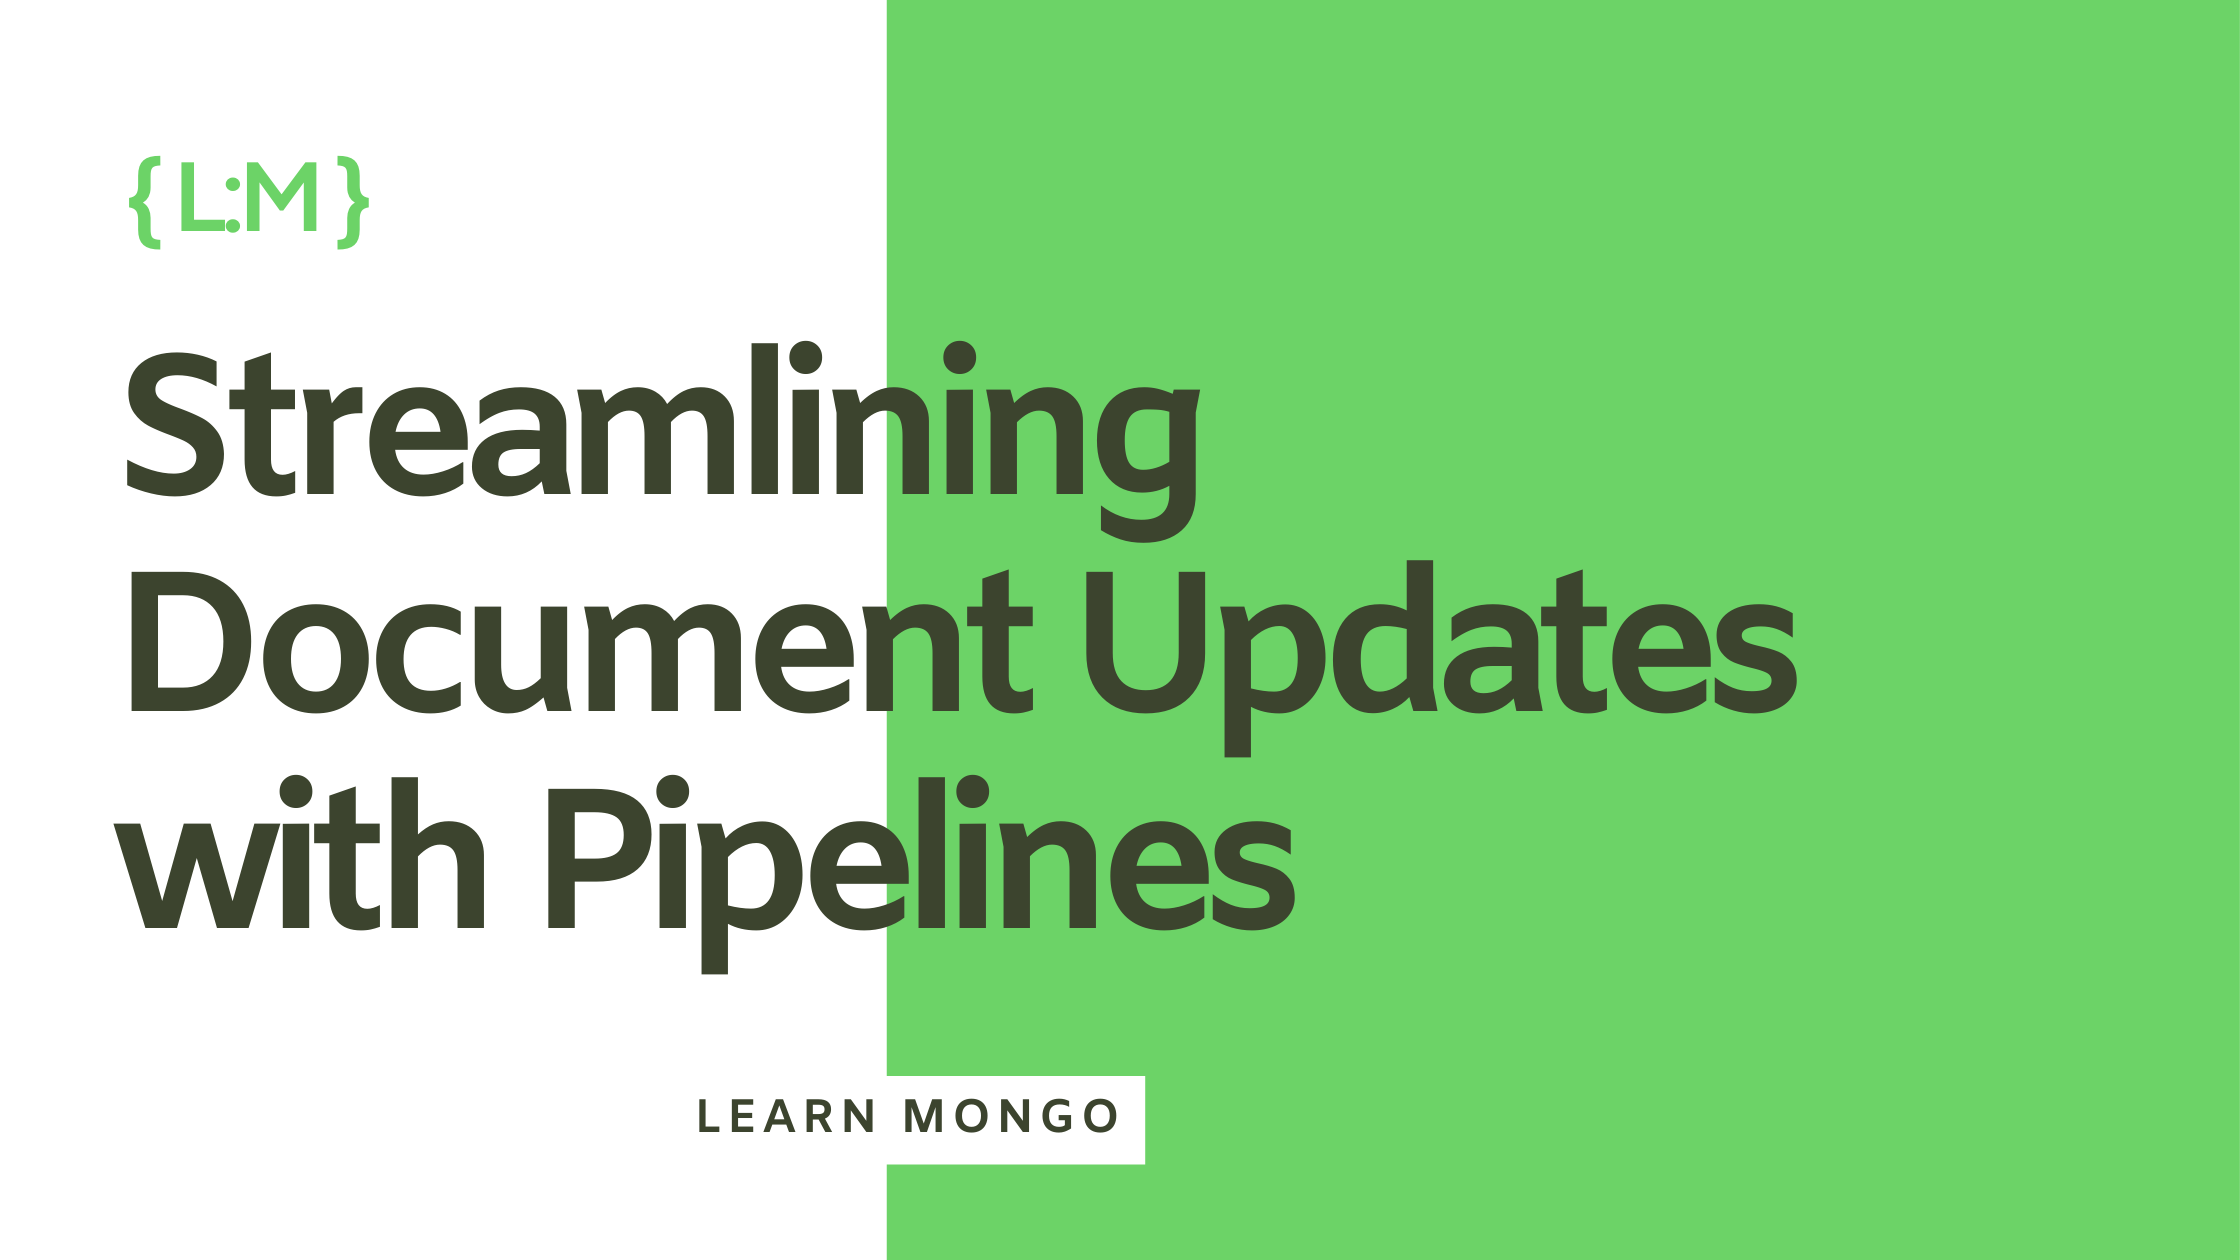 Streamlining Document Updates with Pipelines